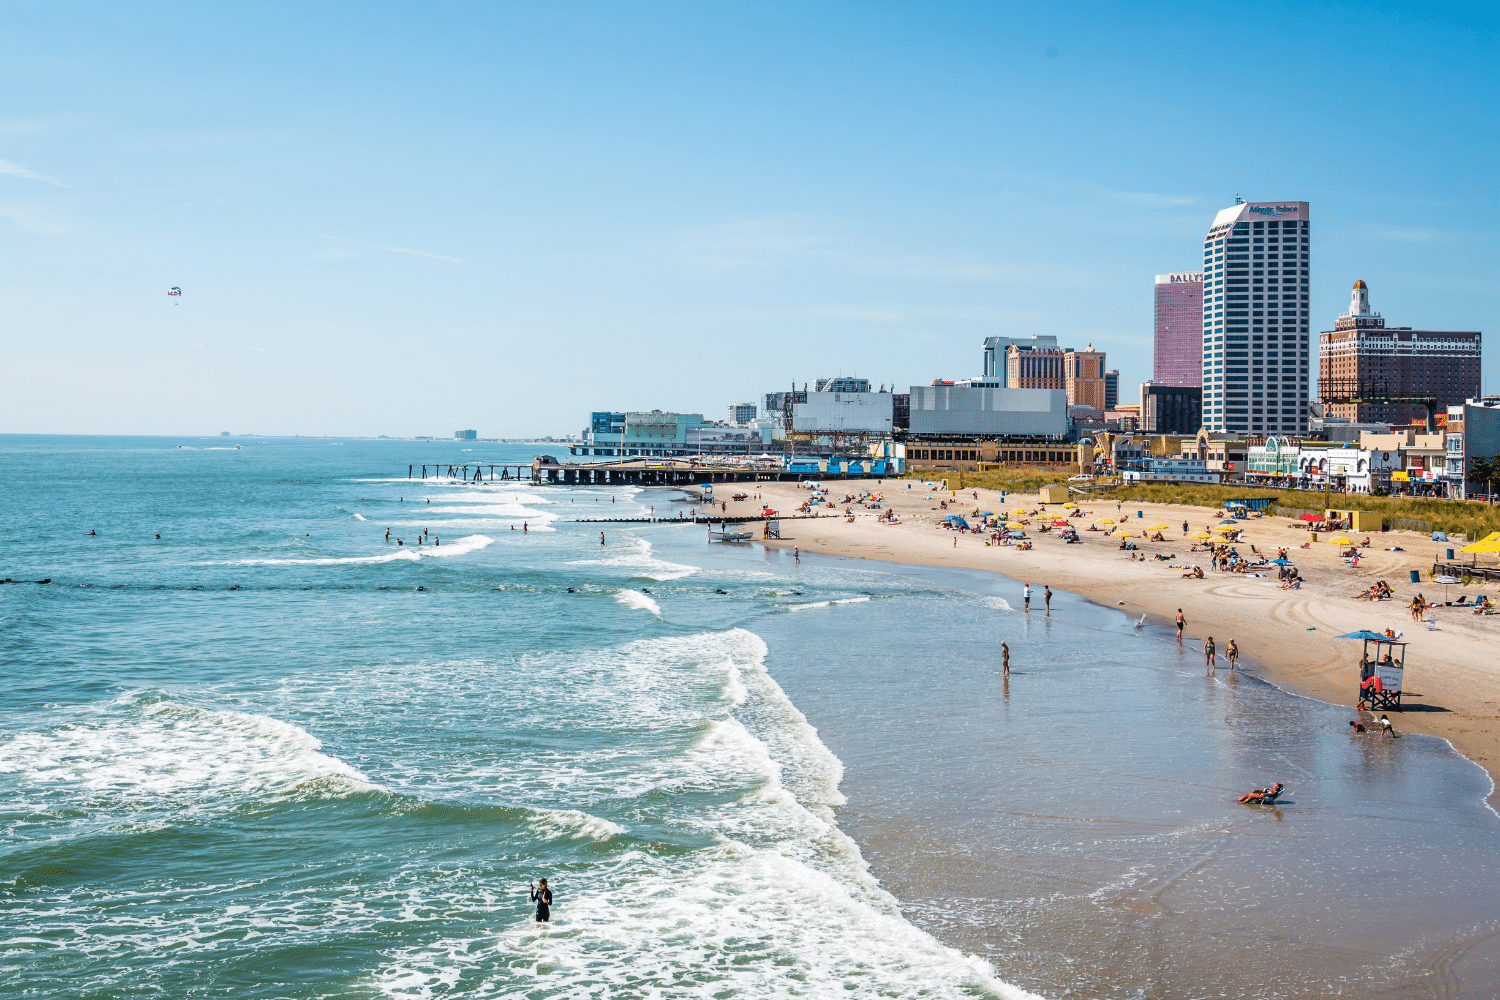 7 tips for your trip to Atlantic City